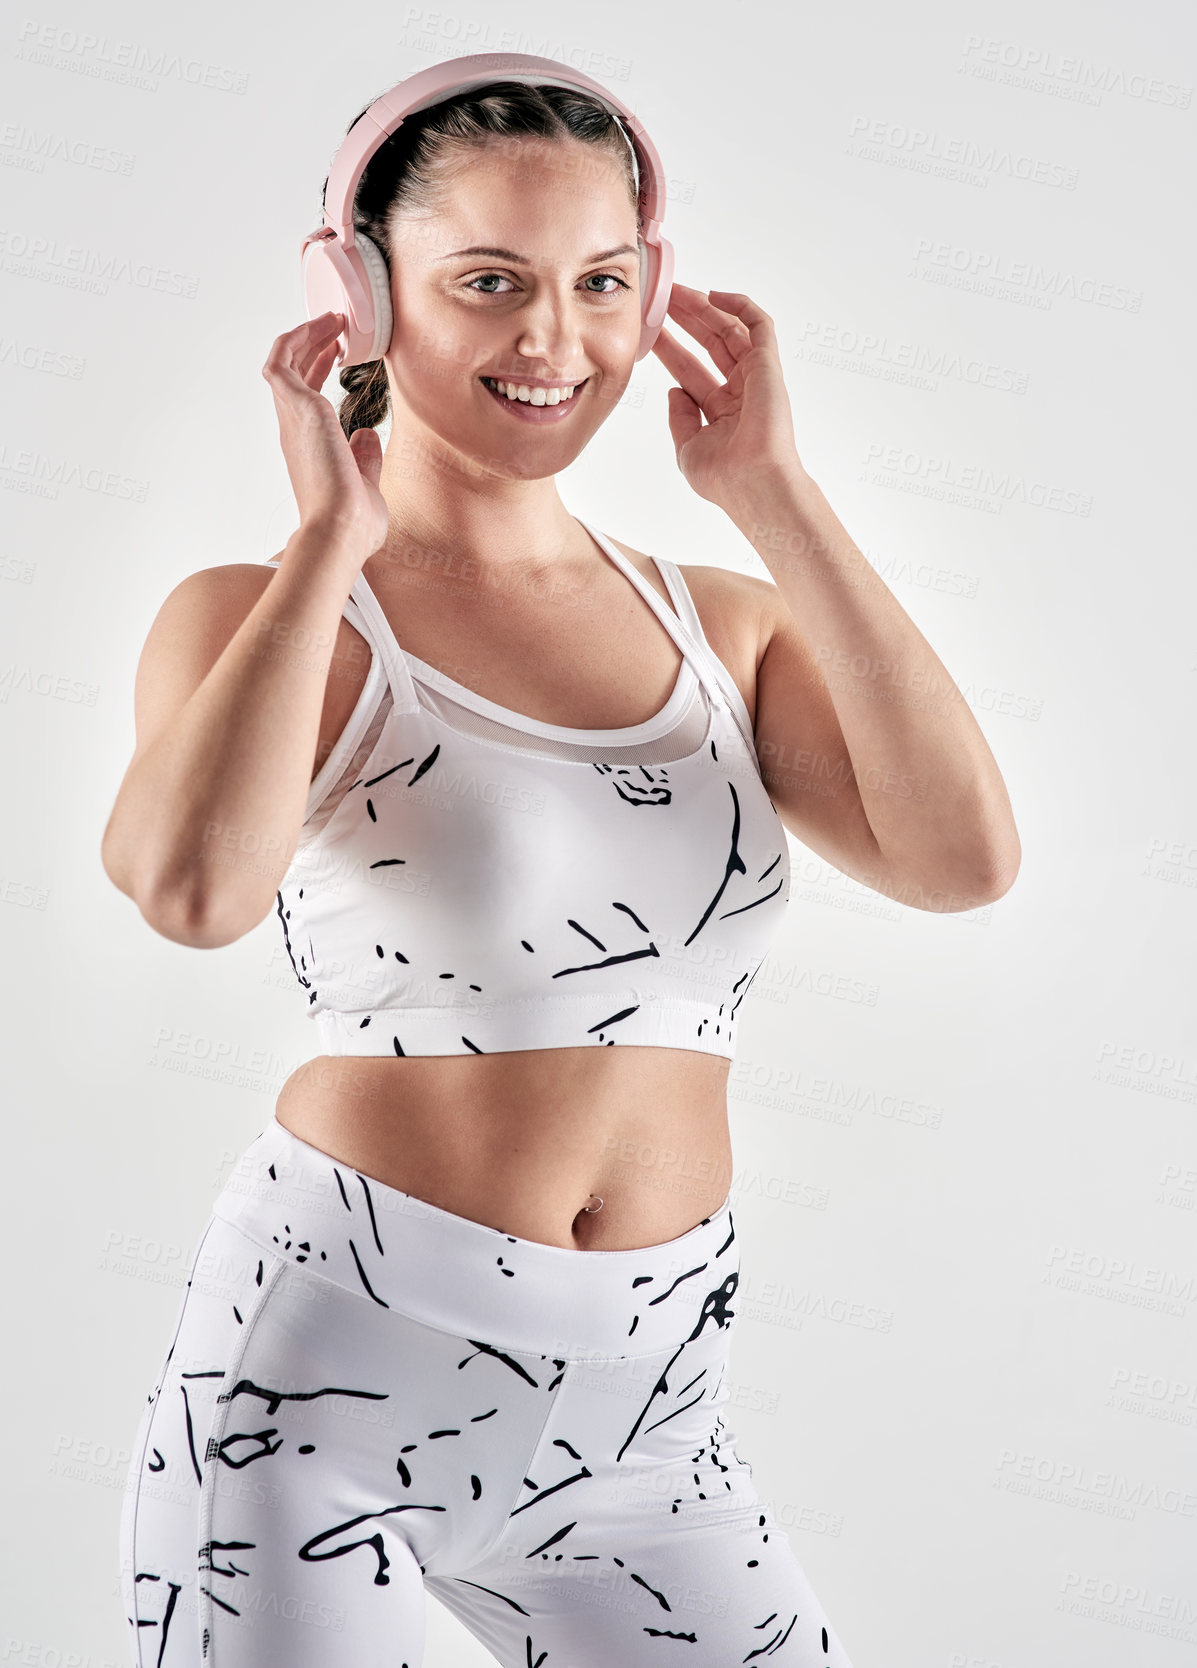 Buy stock photo Studio portrait of a sporty young woman wearing headphones against a white background